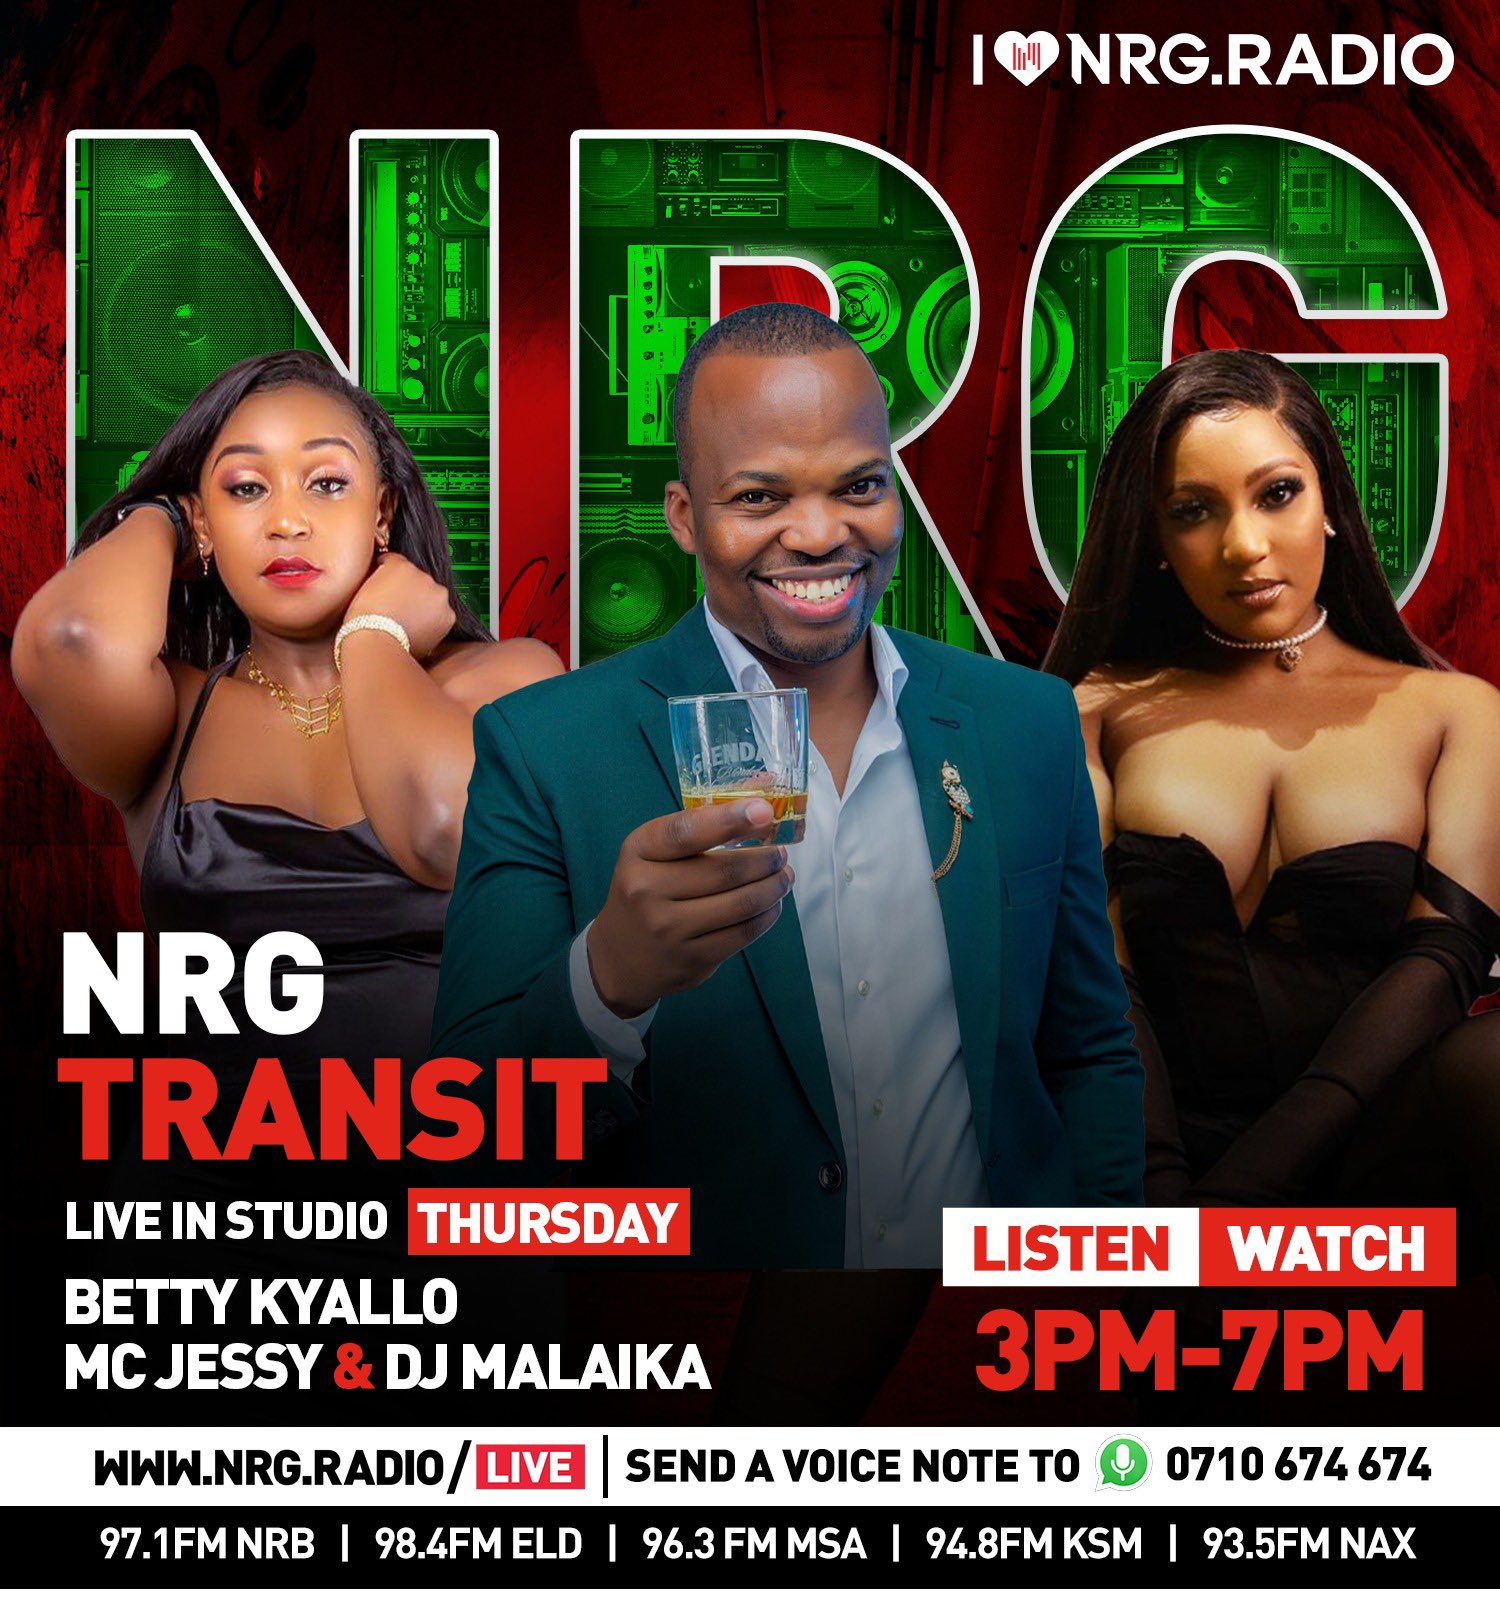 NRG Radio on Twitter: "Taking over the Transit show😎 It going down🔥🔥  Tune in to catch the littest and baddest radio crew in town🙌🏾🙌🏾  @jessythemc @djmalaika @bettymuteikyallo #NRGSexy5 #NRGTurn5  https://t.co/36YfvNw2zL" / Twitter